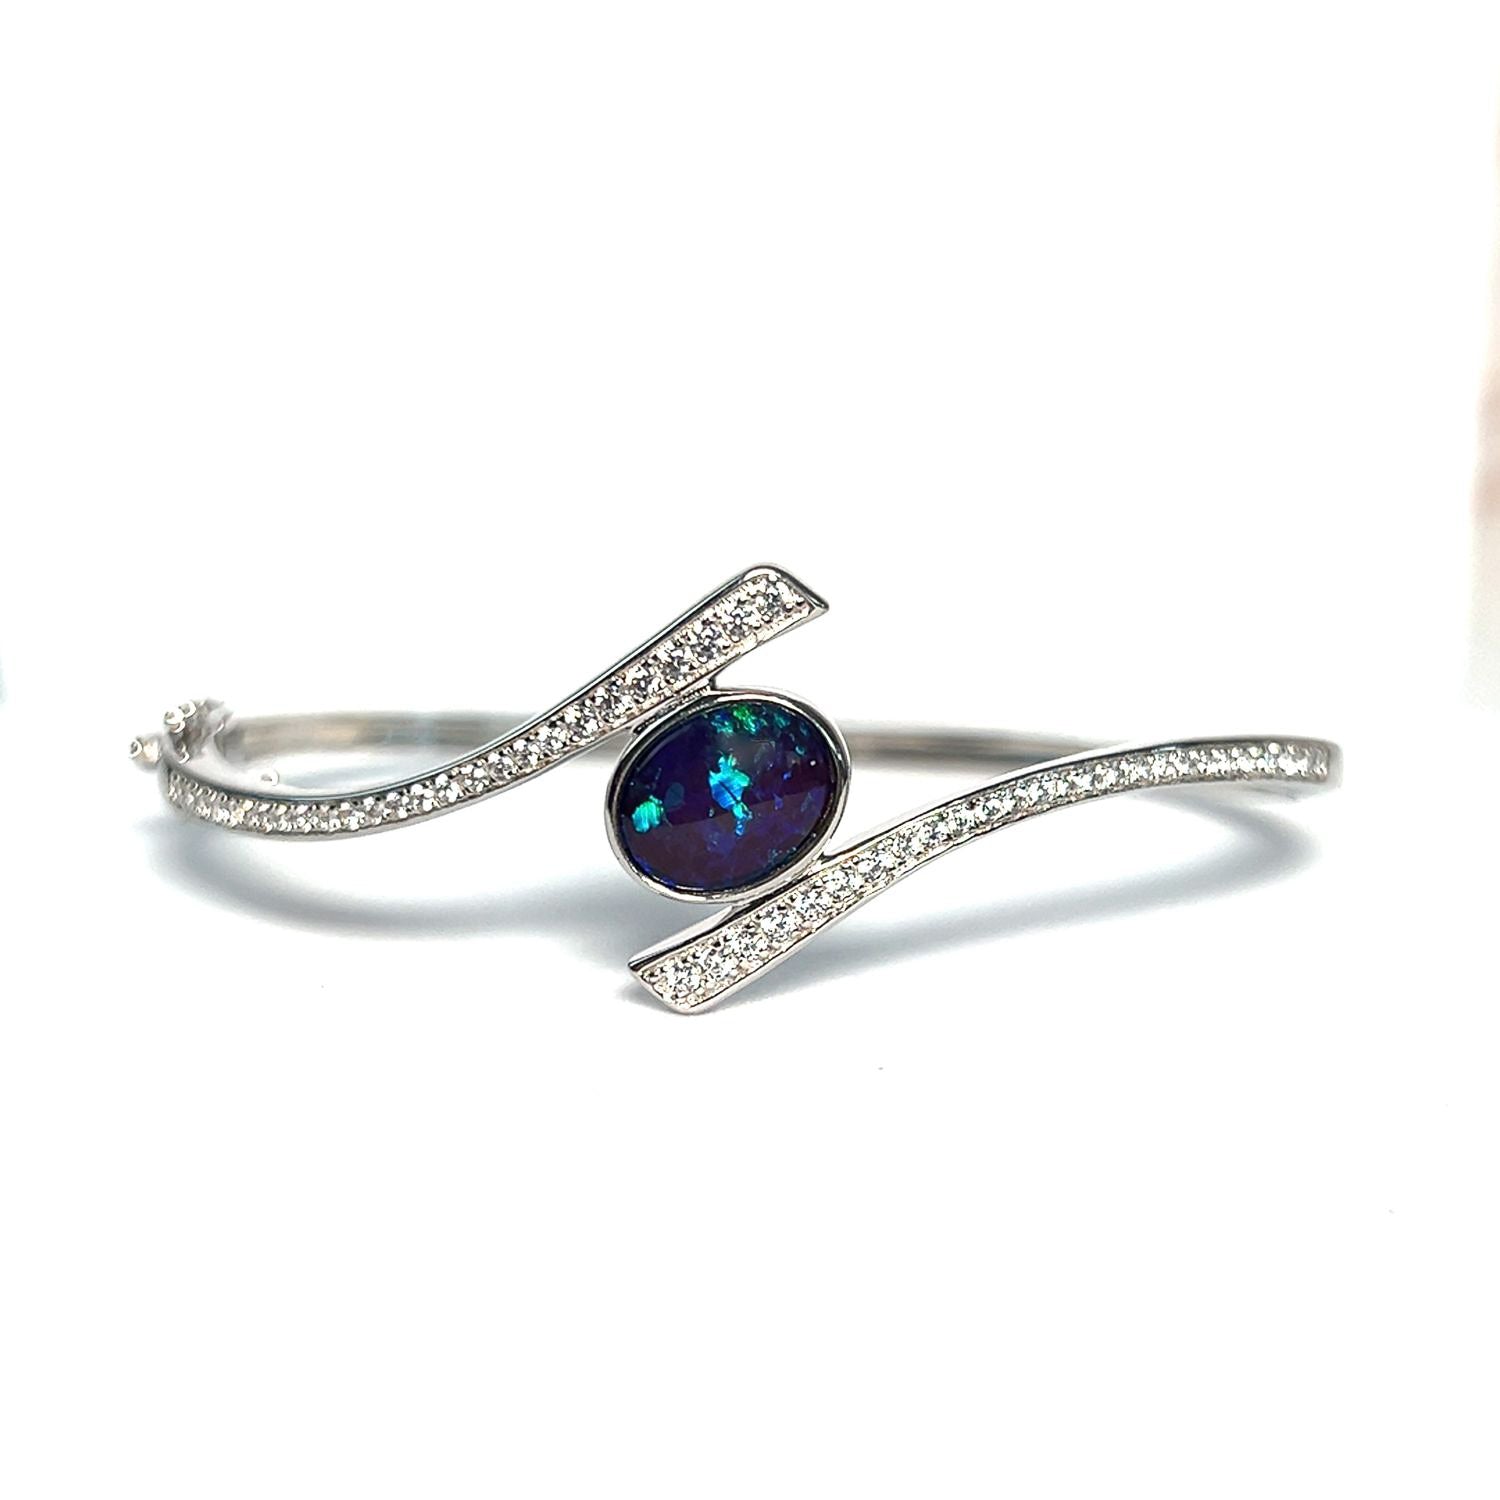 Sterling Silver cross over snap bangle with Opal triplet and cz